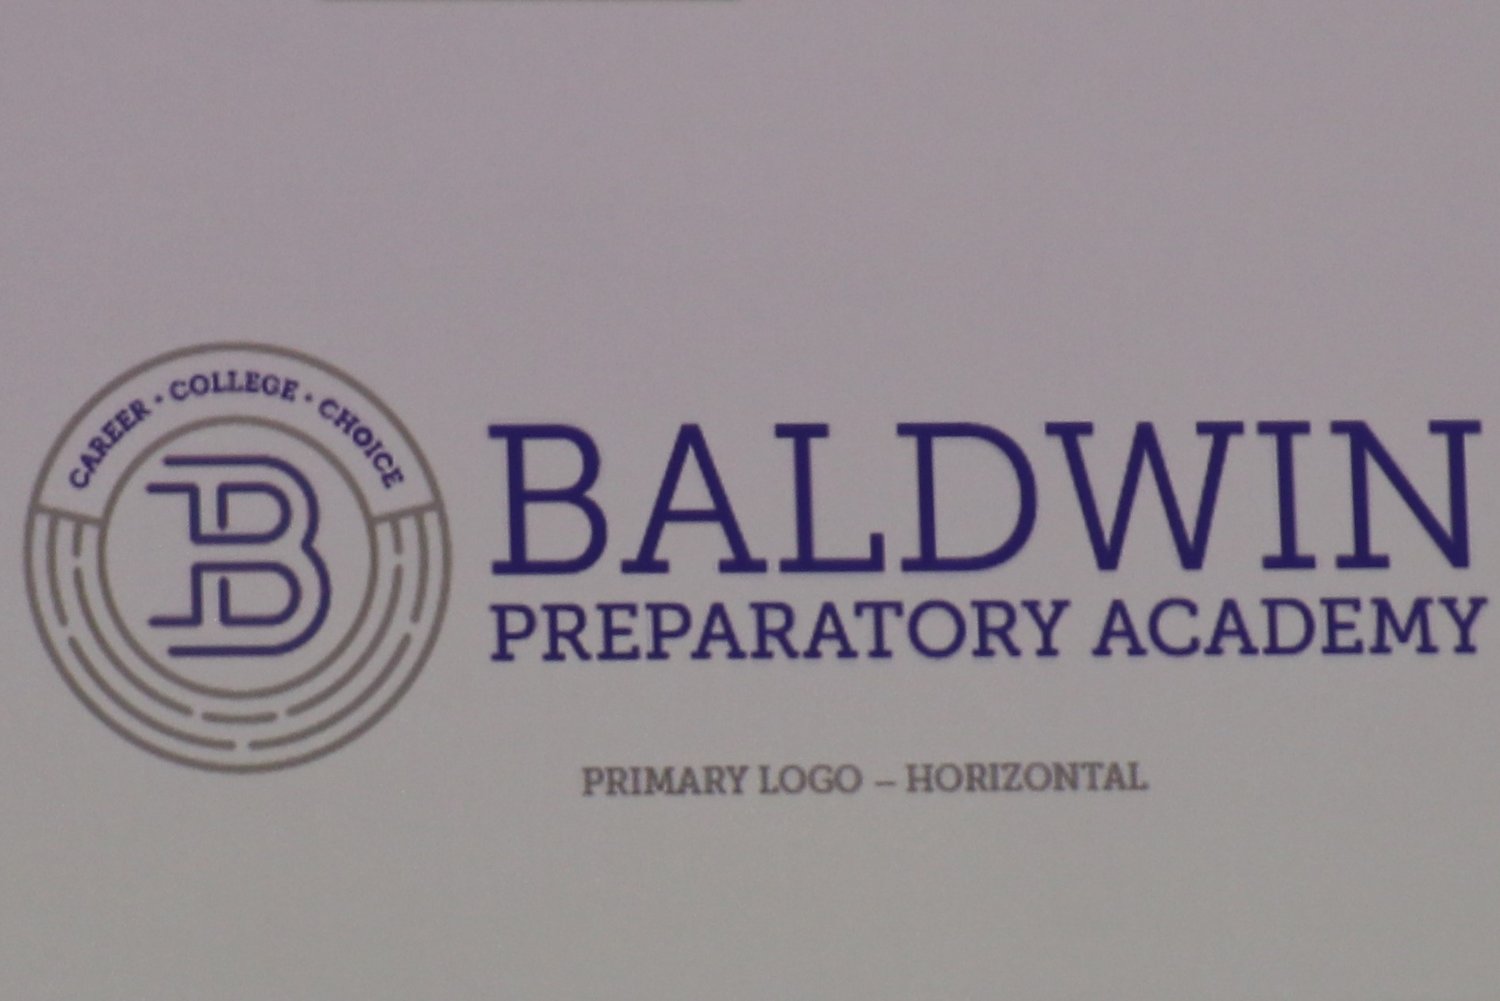 During a May 19 presentation during the BCBE meeting, officials of Davis South Barnette & Patrick presented the BCBE with the name and logo design for the new Baldwin Preparatory Academy.